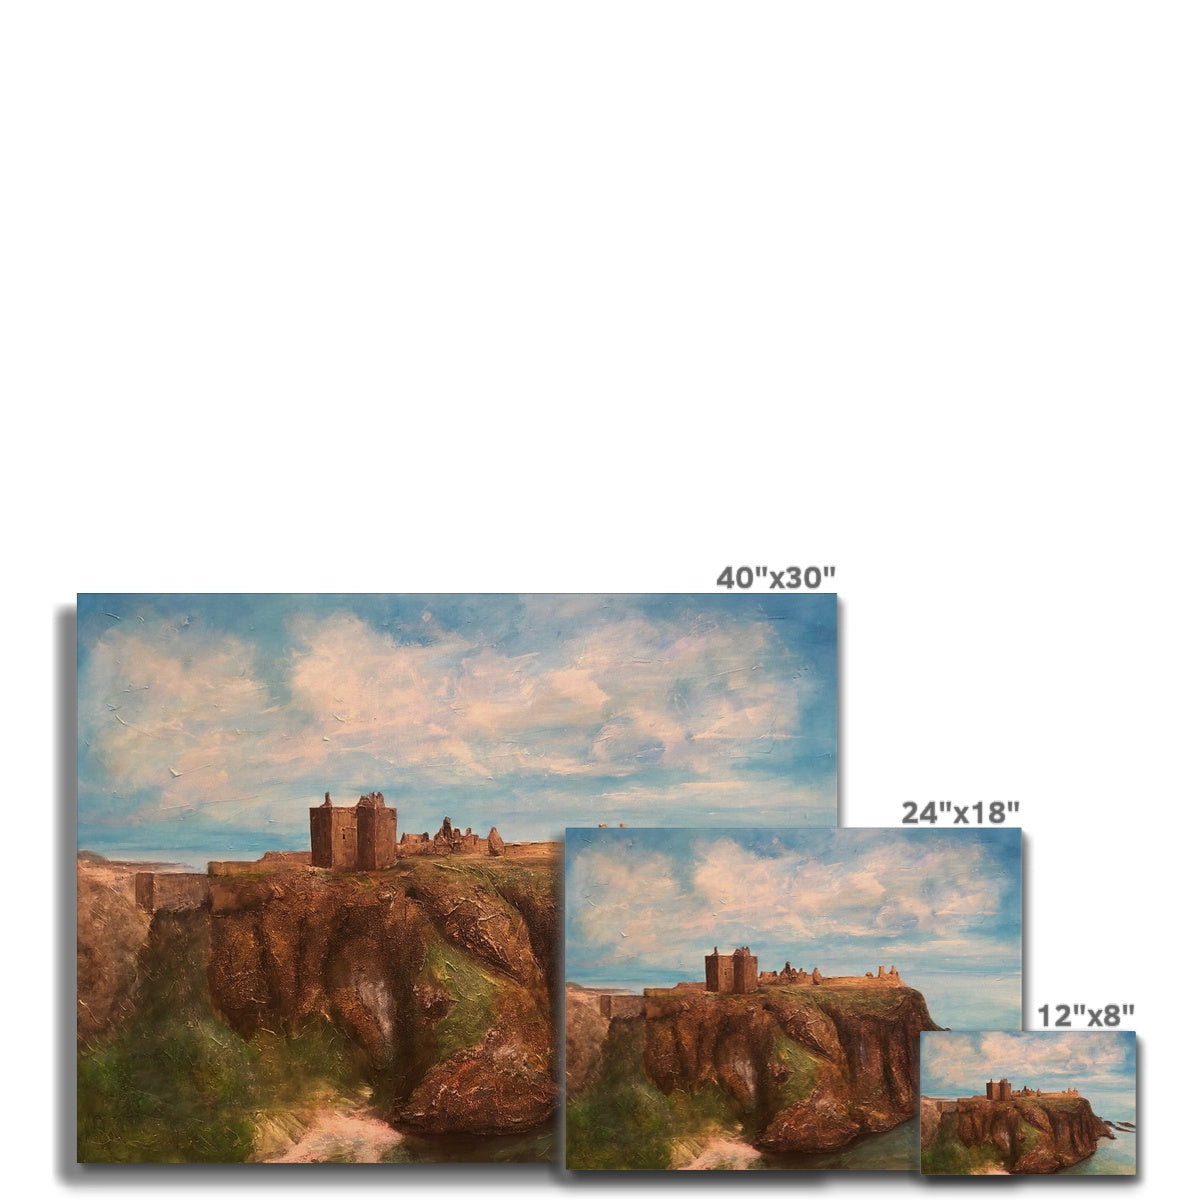 Dunnottar Castle Painting | Canvas From Scotland-Contemporary Stretched Canvas Prints-Historic & Iconic Scotland Art Gallery-Paintings, Prints, Homeware, Art Gifts From Scotland By Scottish Artist Kevin Hunter